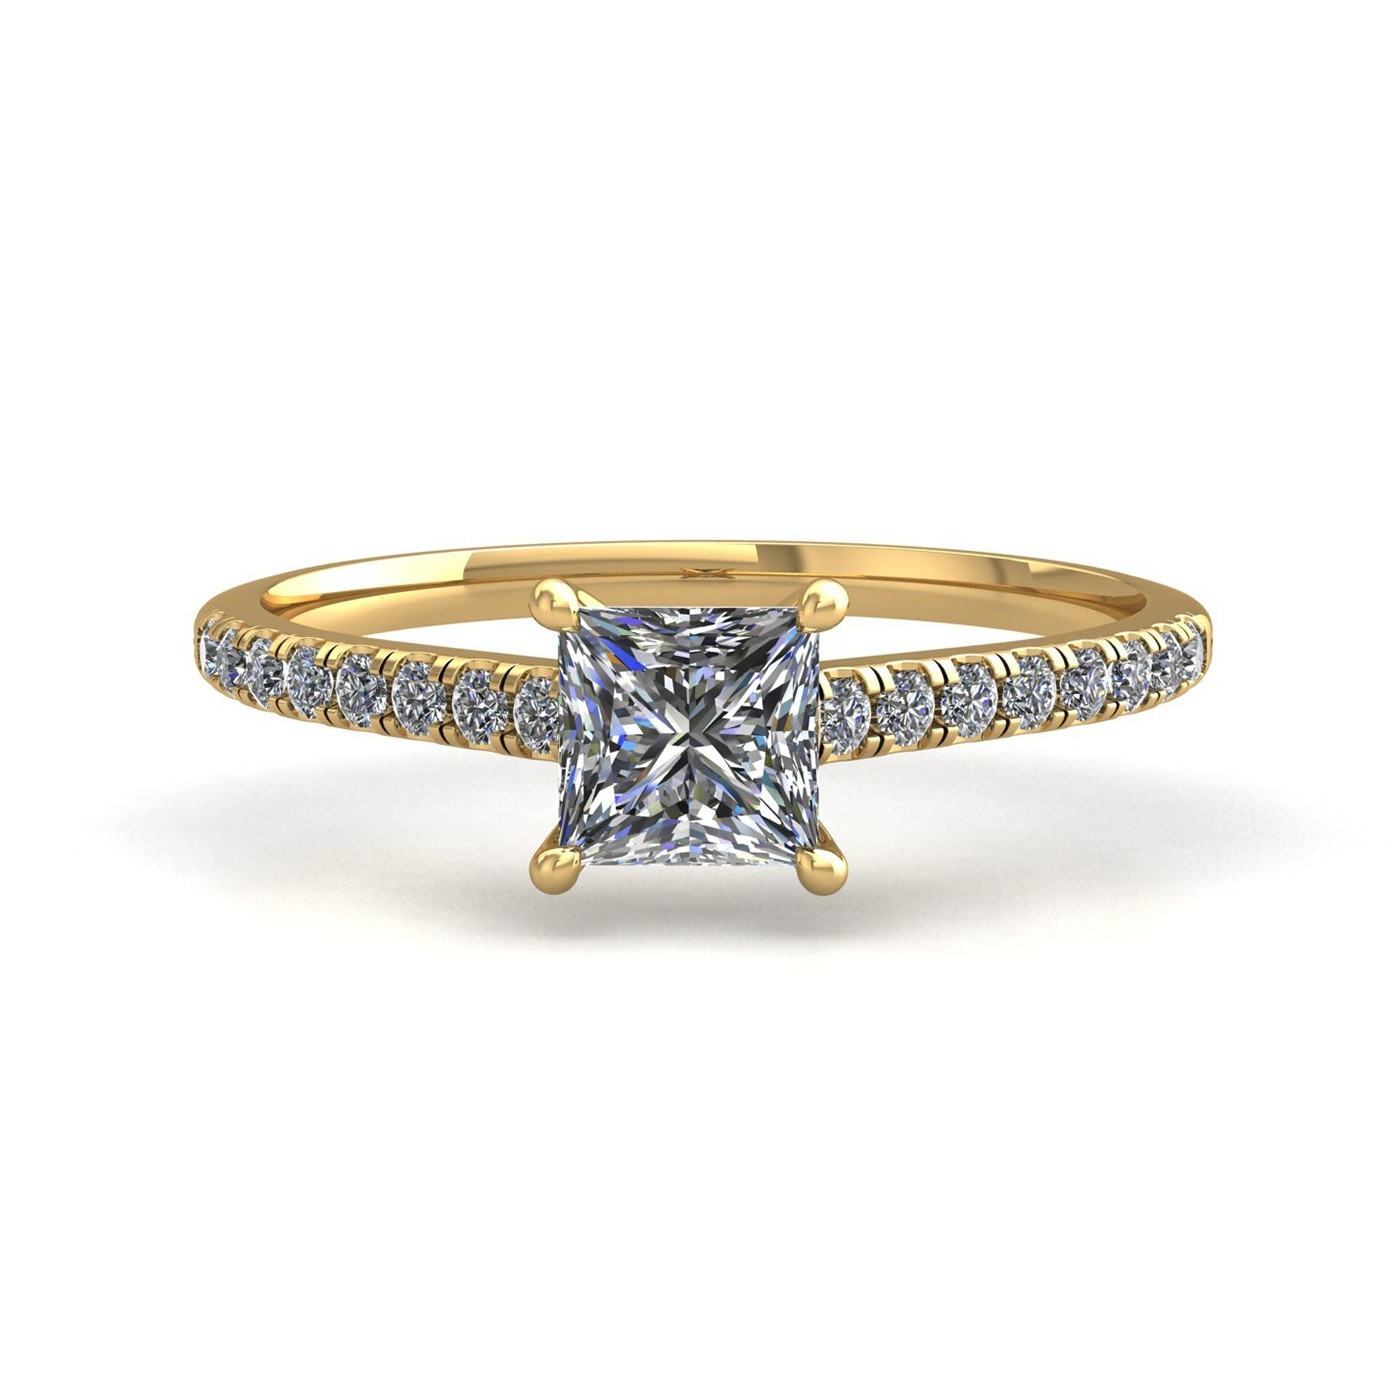 18k yellow gold 1,00 ct 4 prongs princess cut diamond engagement ring with whisper thin pavÉ set band Photos & images